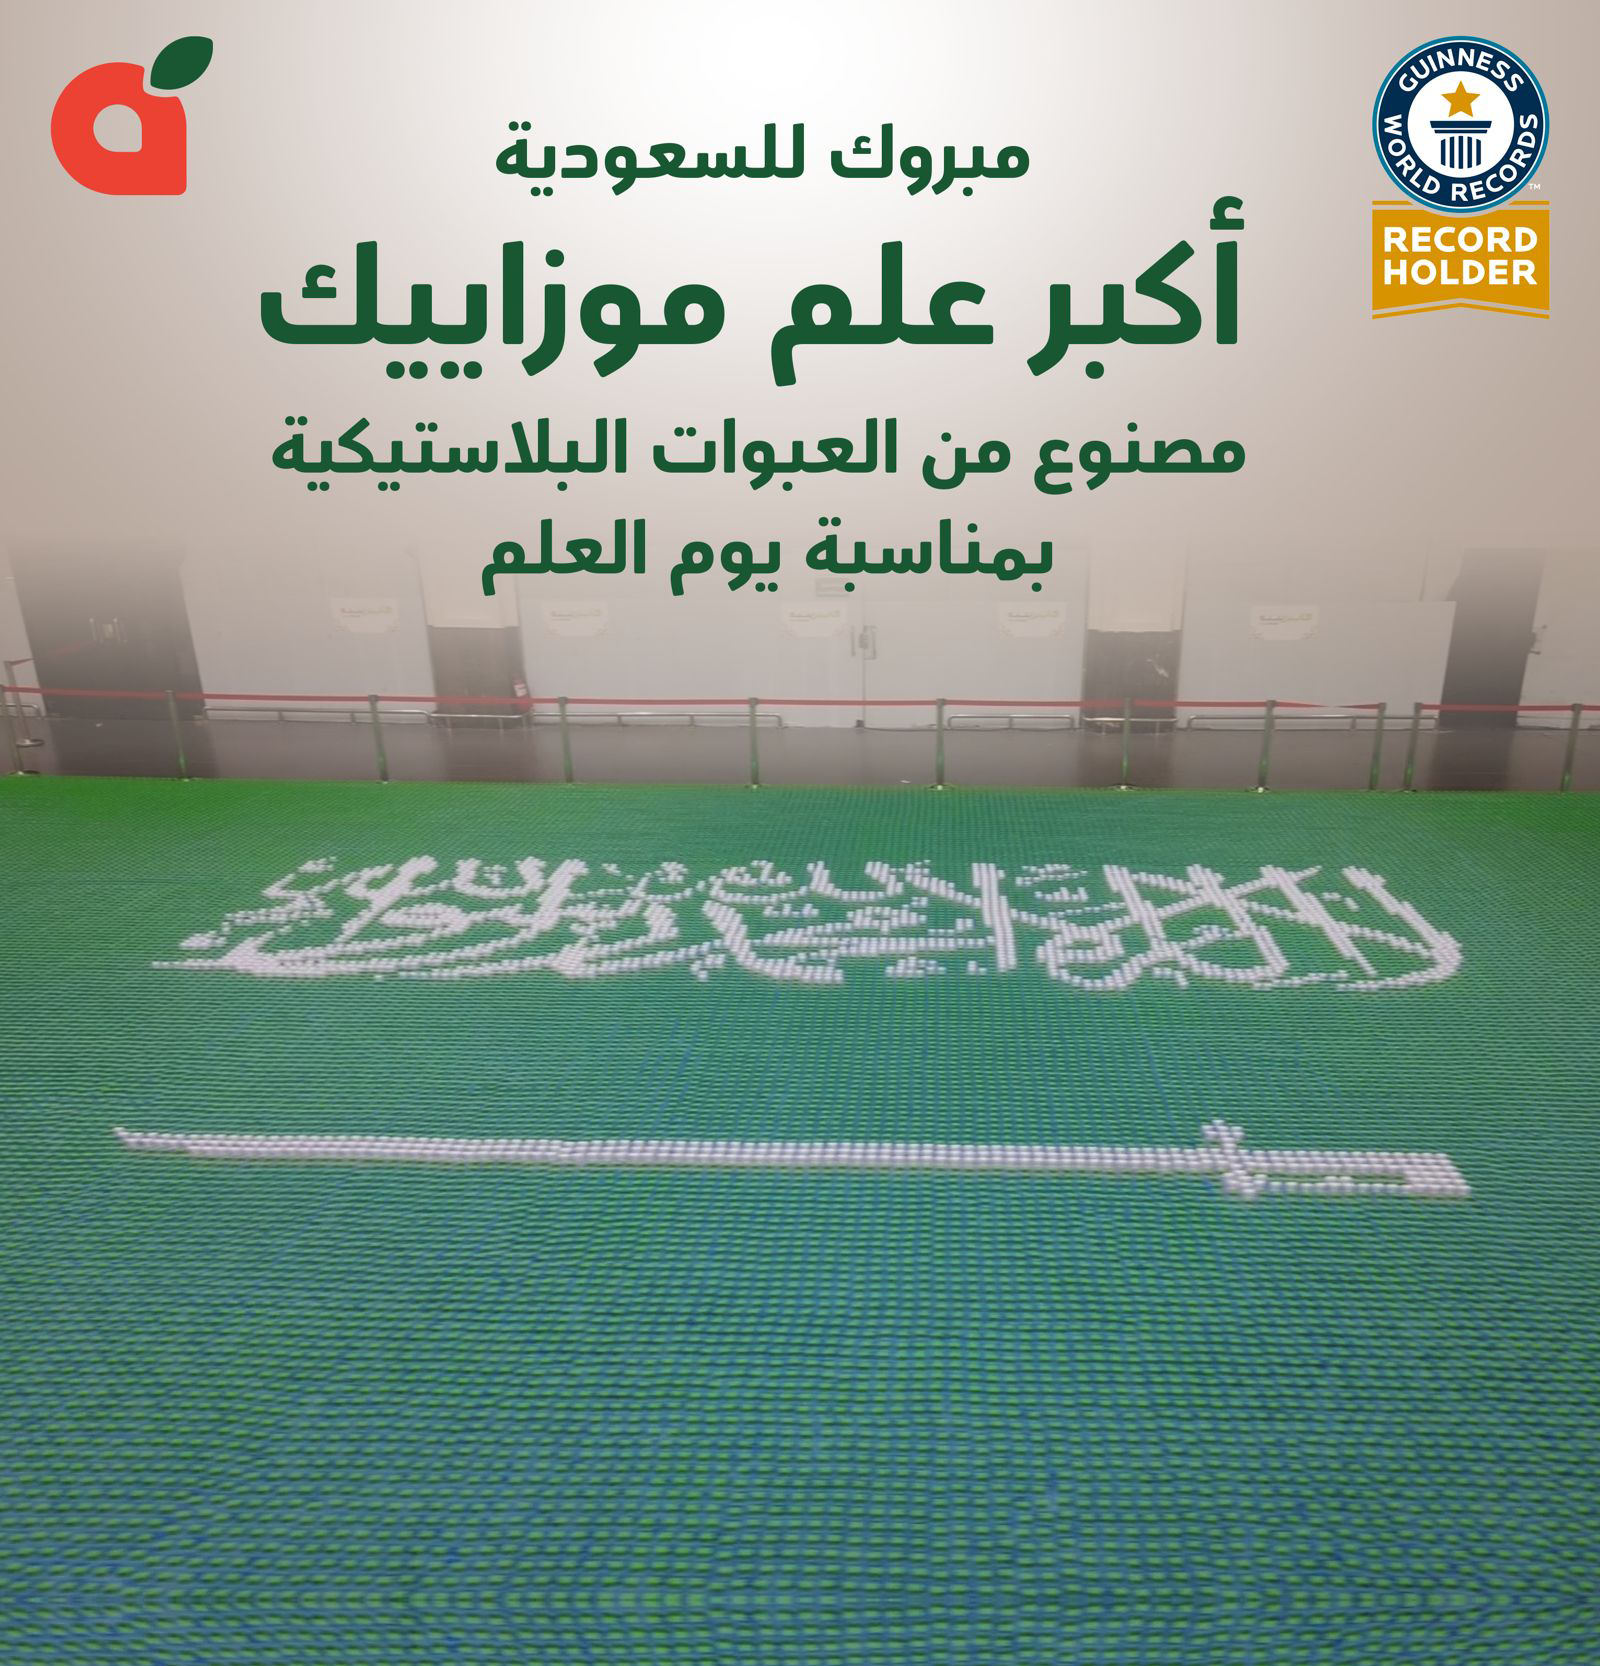 In celebration of the Saudi Flag Day Panda Achieves a Guinness World Records Title by Creating the Largest Mosaic Flag